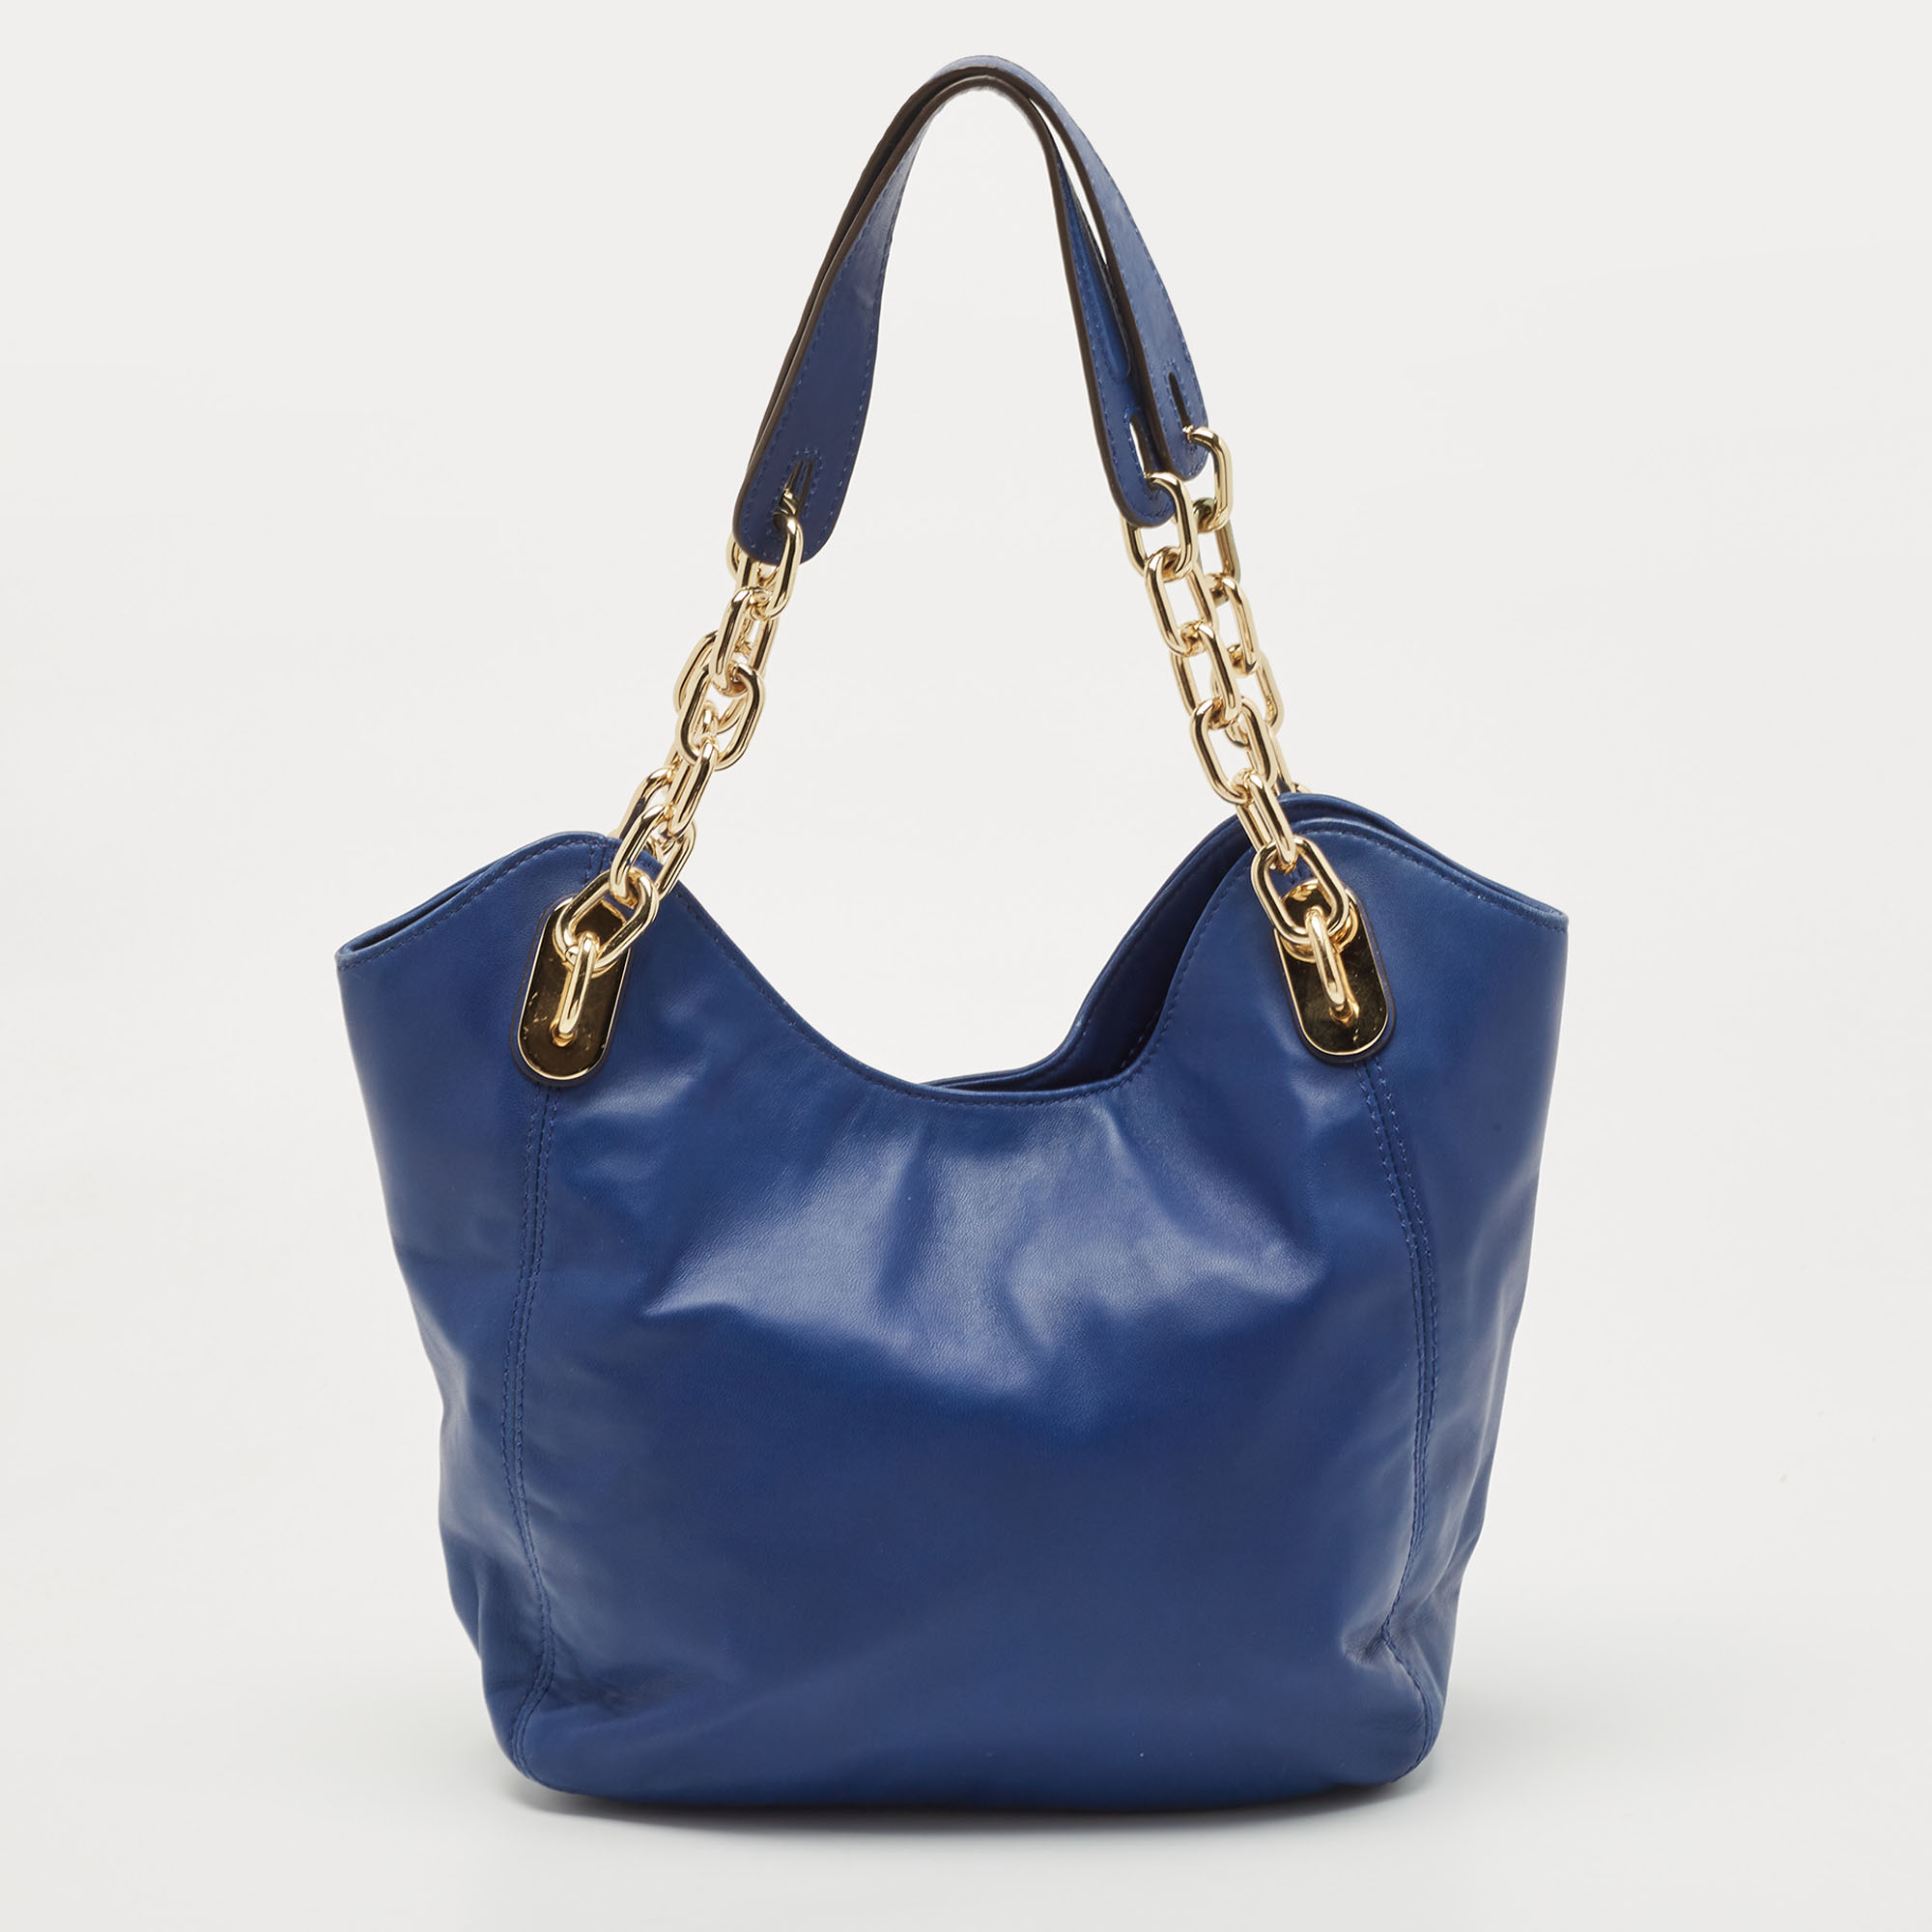 Created from high quality materials this MICHAEL Michael Kors tote is enriched with functional and classic elements. It can be carried around conveniently and its interior is perfectly sized to keep your belongings with ease.